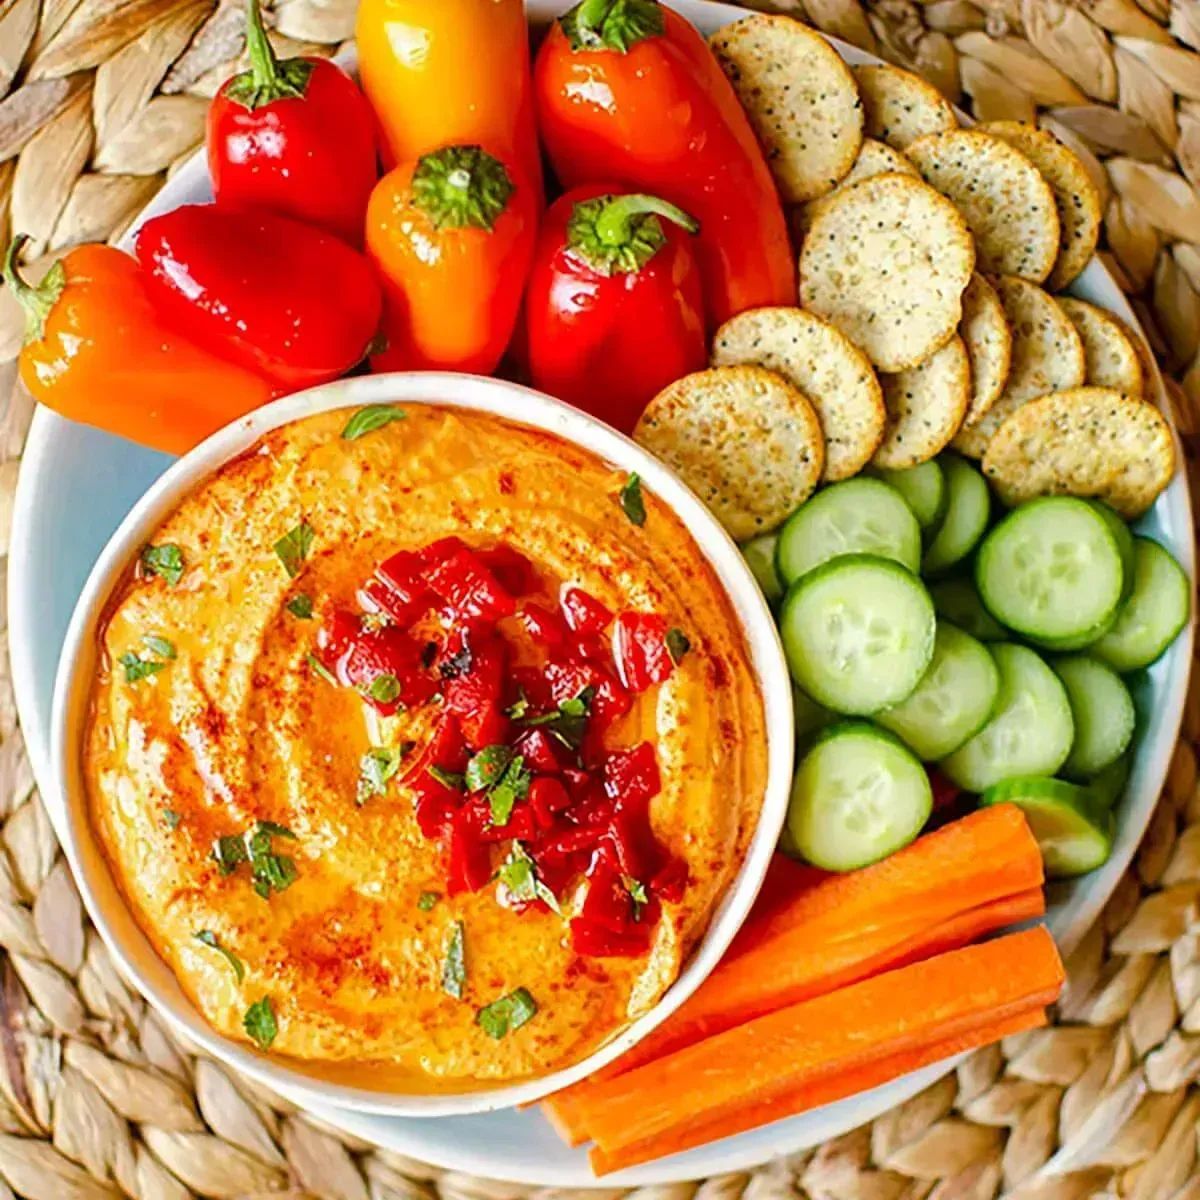 Hummus with red pepper - YUM! 💕 You will need chickpeas, roasted red peppers, tahini, lemon juice, garlic, olive oil, water, salt, cayenne, pepper or paprika. RECIPE: buff.ly/3Jqplyg #deliciousfood #recipeoftheday